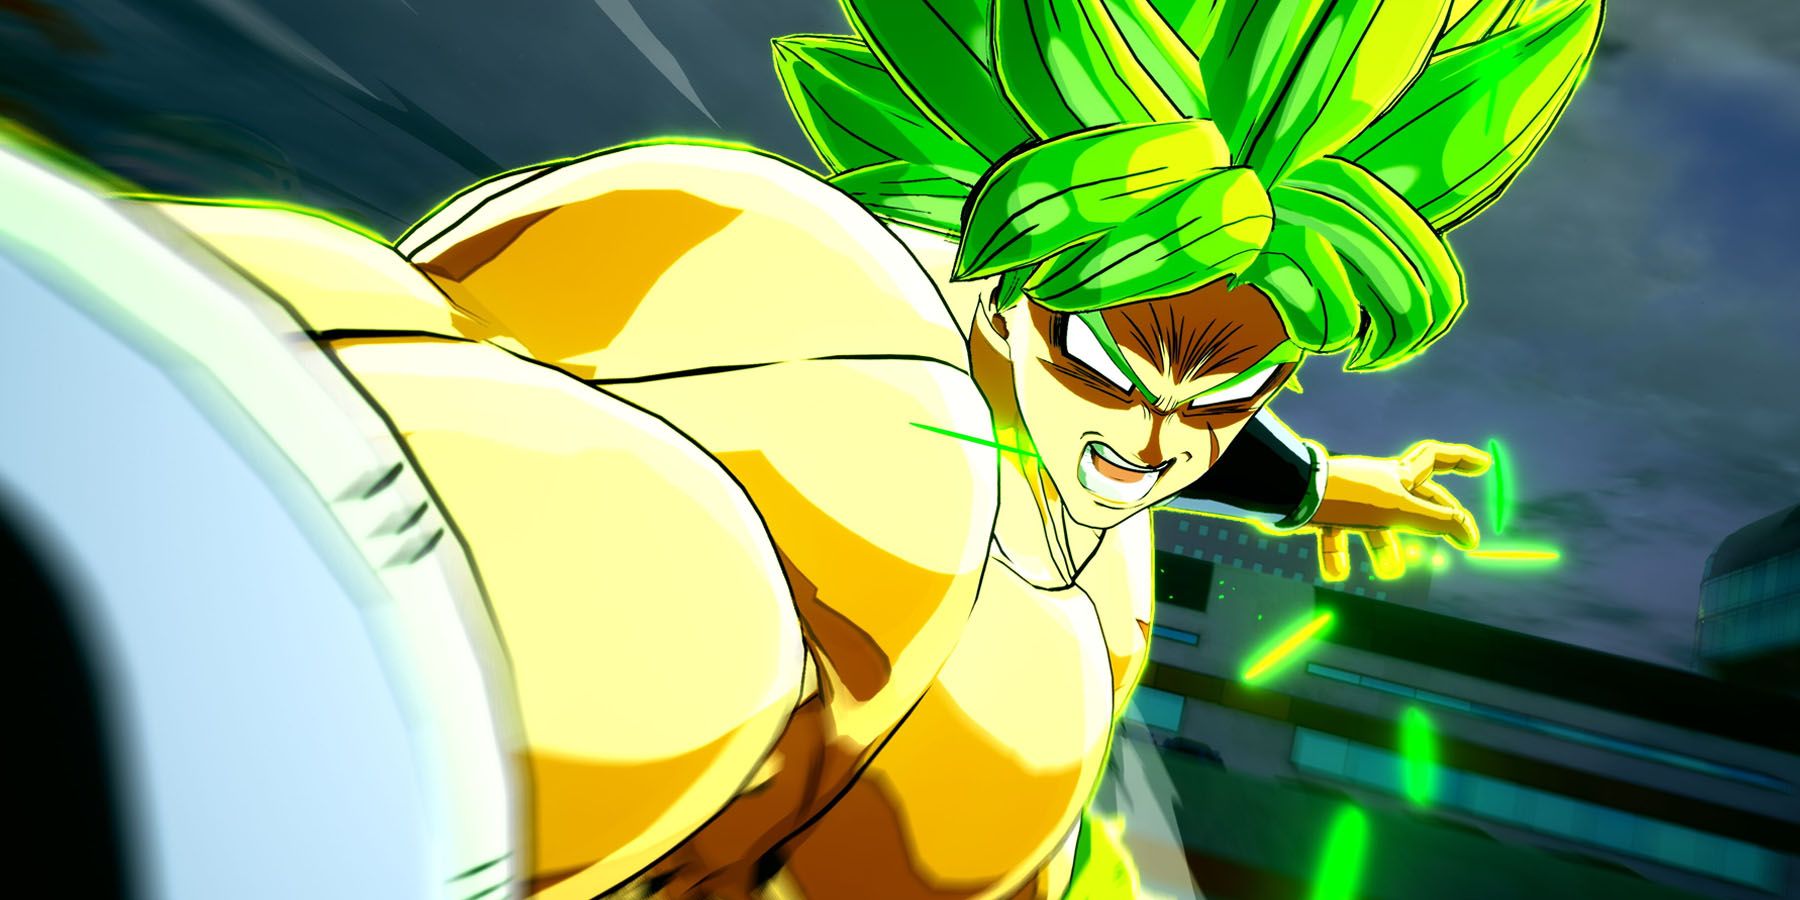 A screenshot of Broly in his Legendary Super Sayian form in Dragon Ball: Sparking Zero.